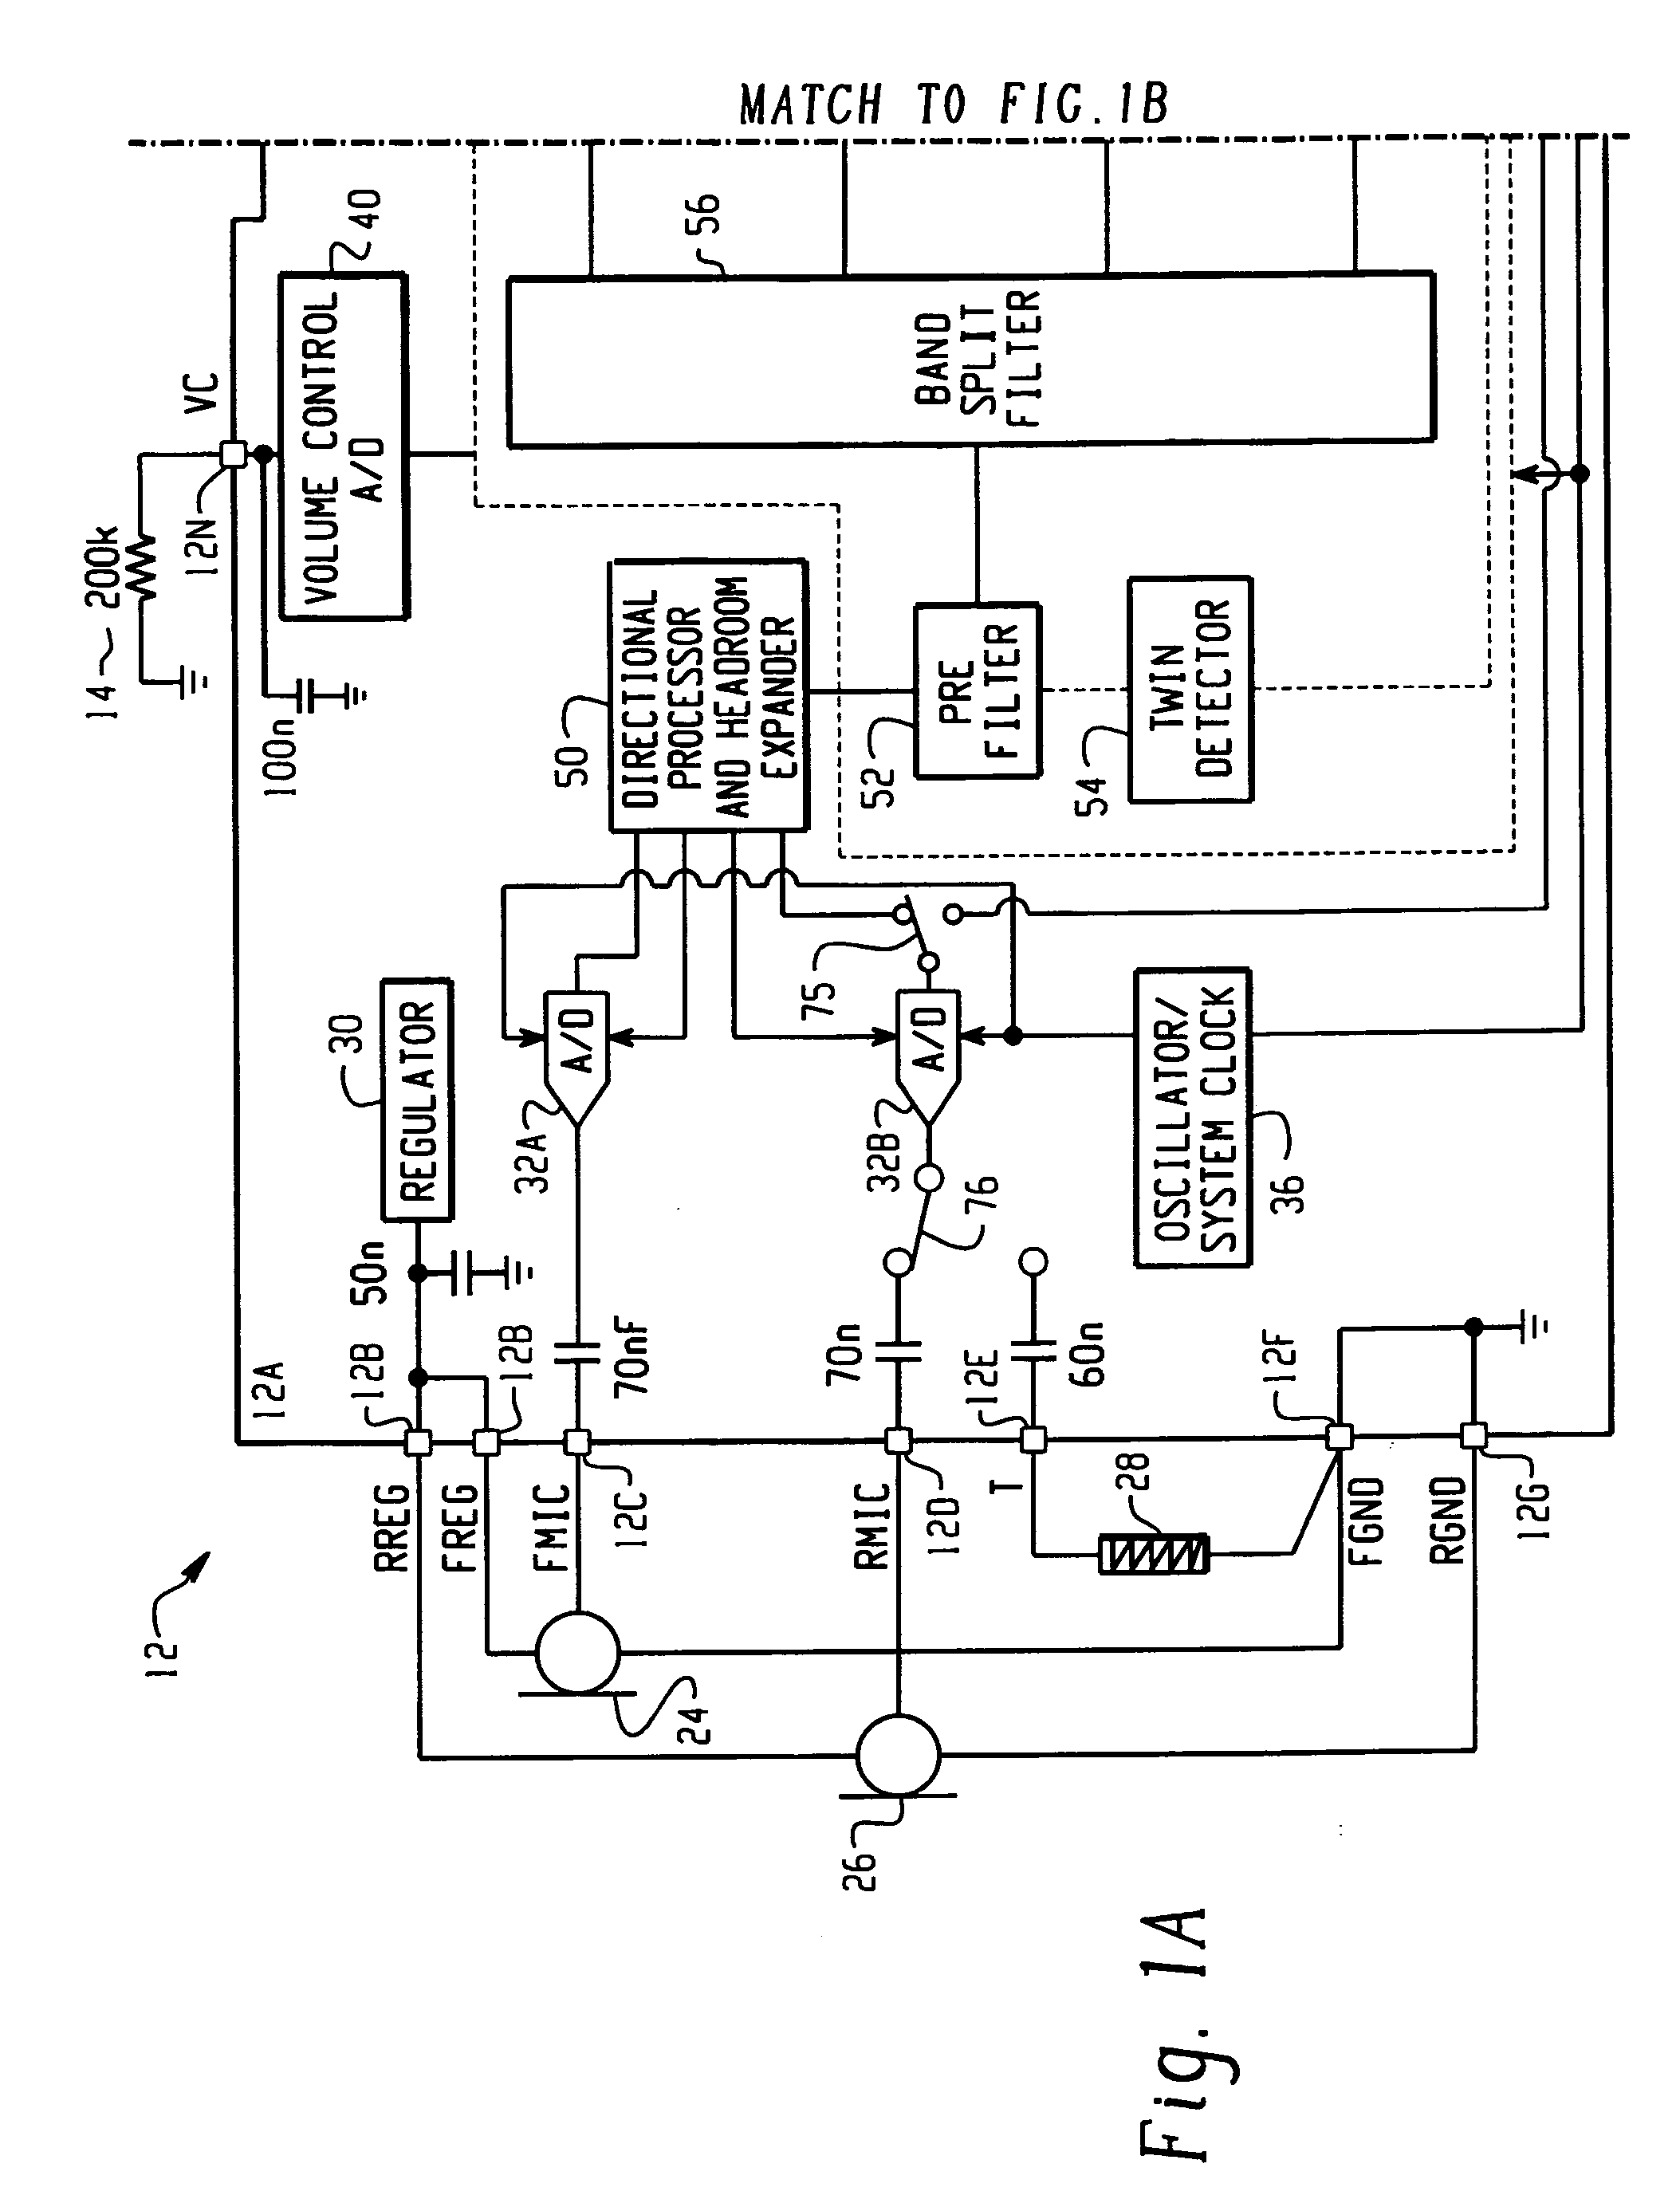 Inter-channel communication in a multi-channel digital hearing instrument